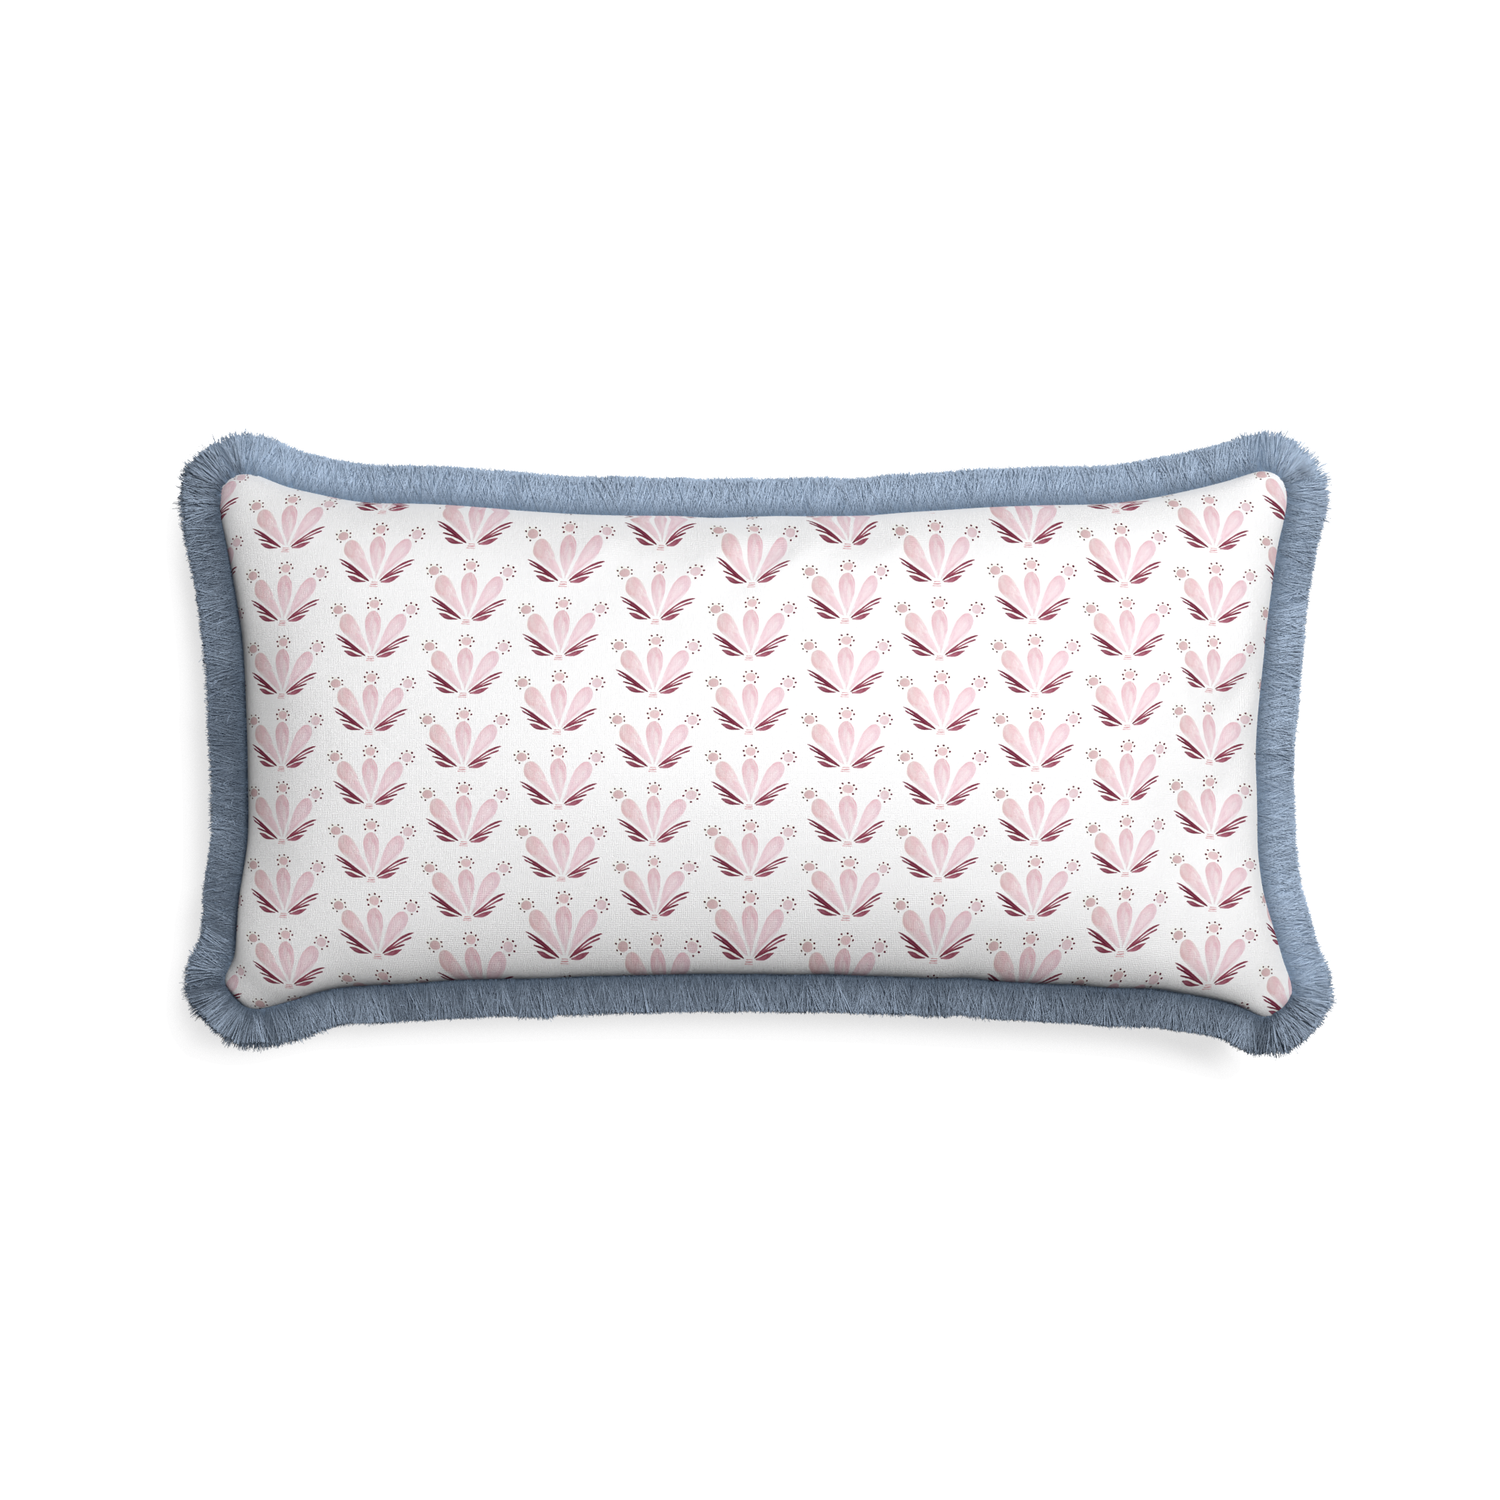 Midi-lumbar serena pink custom pink & burgundy drop repeat floralpillow with sky fringe on white background